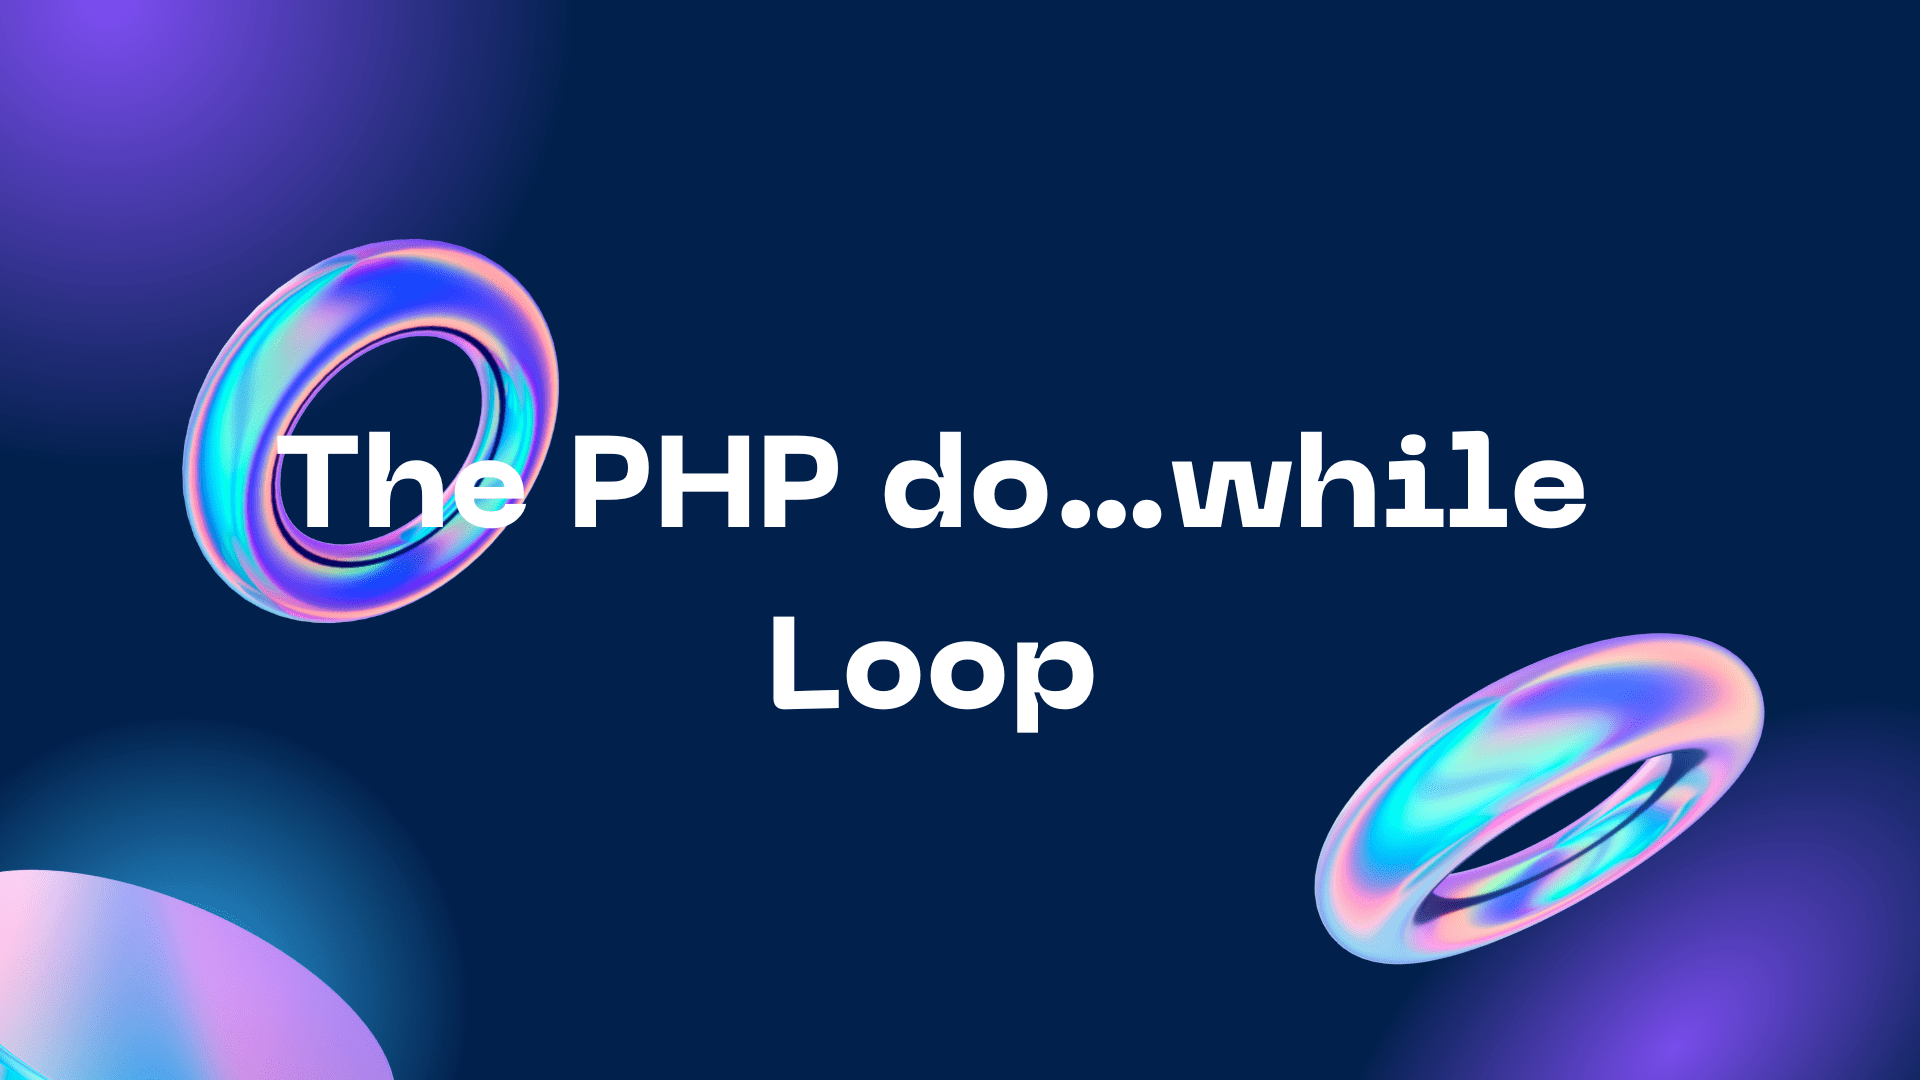 The PHP do…while Loop